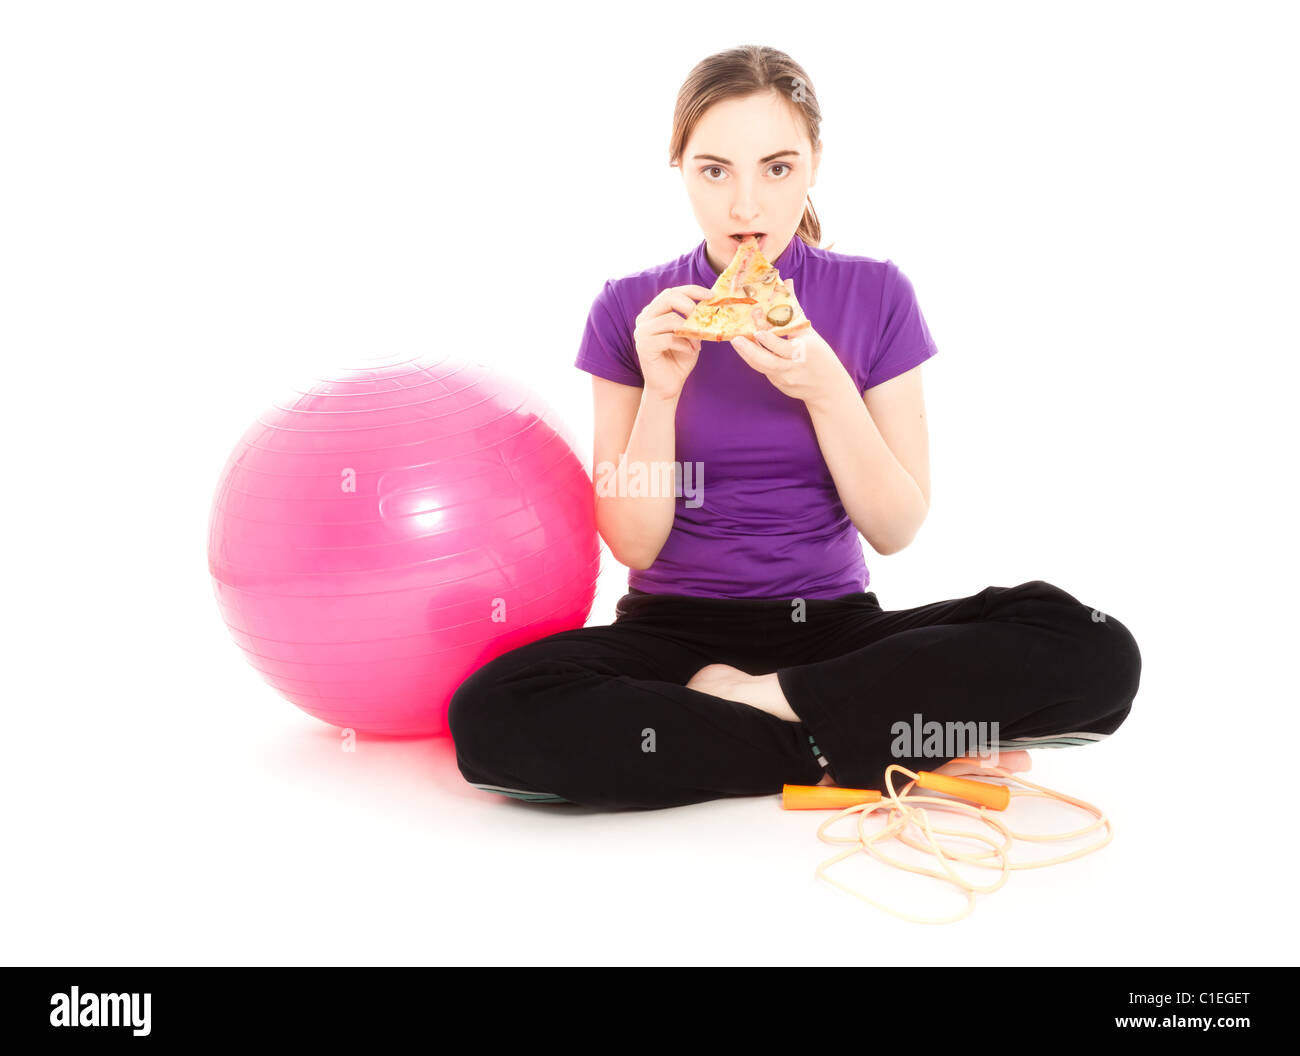 Woman with a slice of pizza, pink gymnastics ball and jump rope Stock Photo